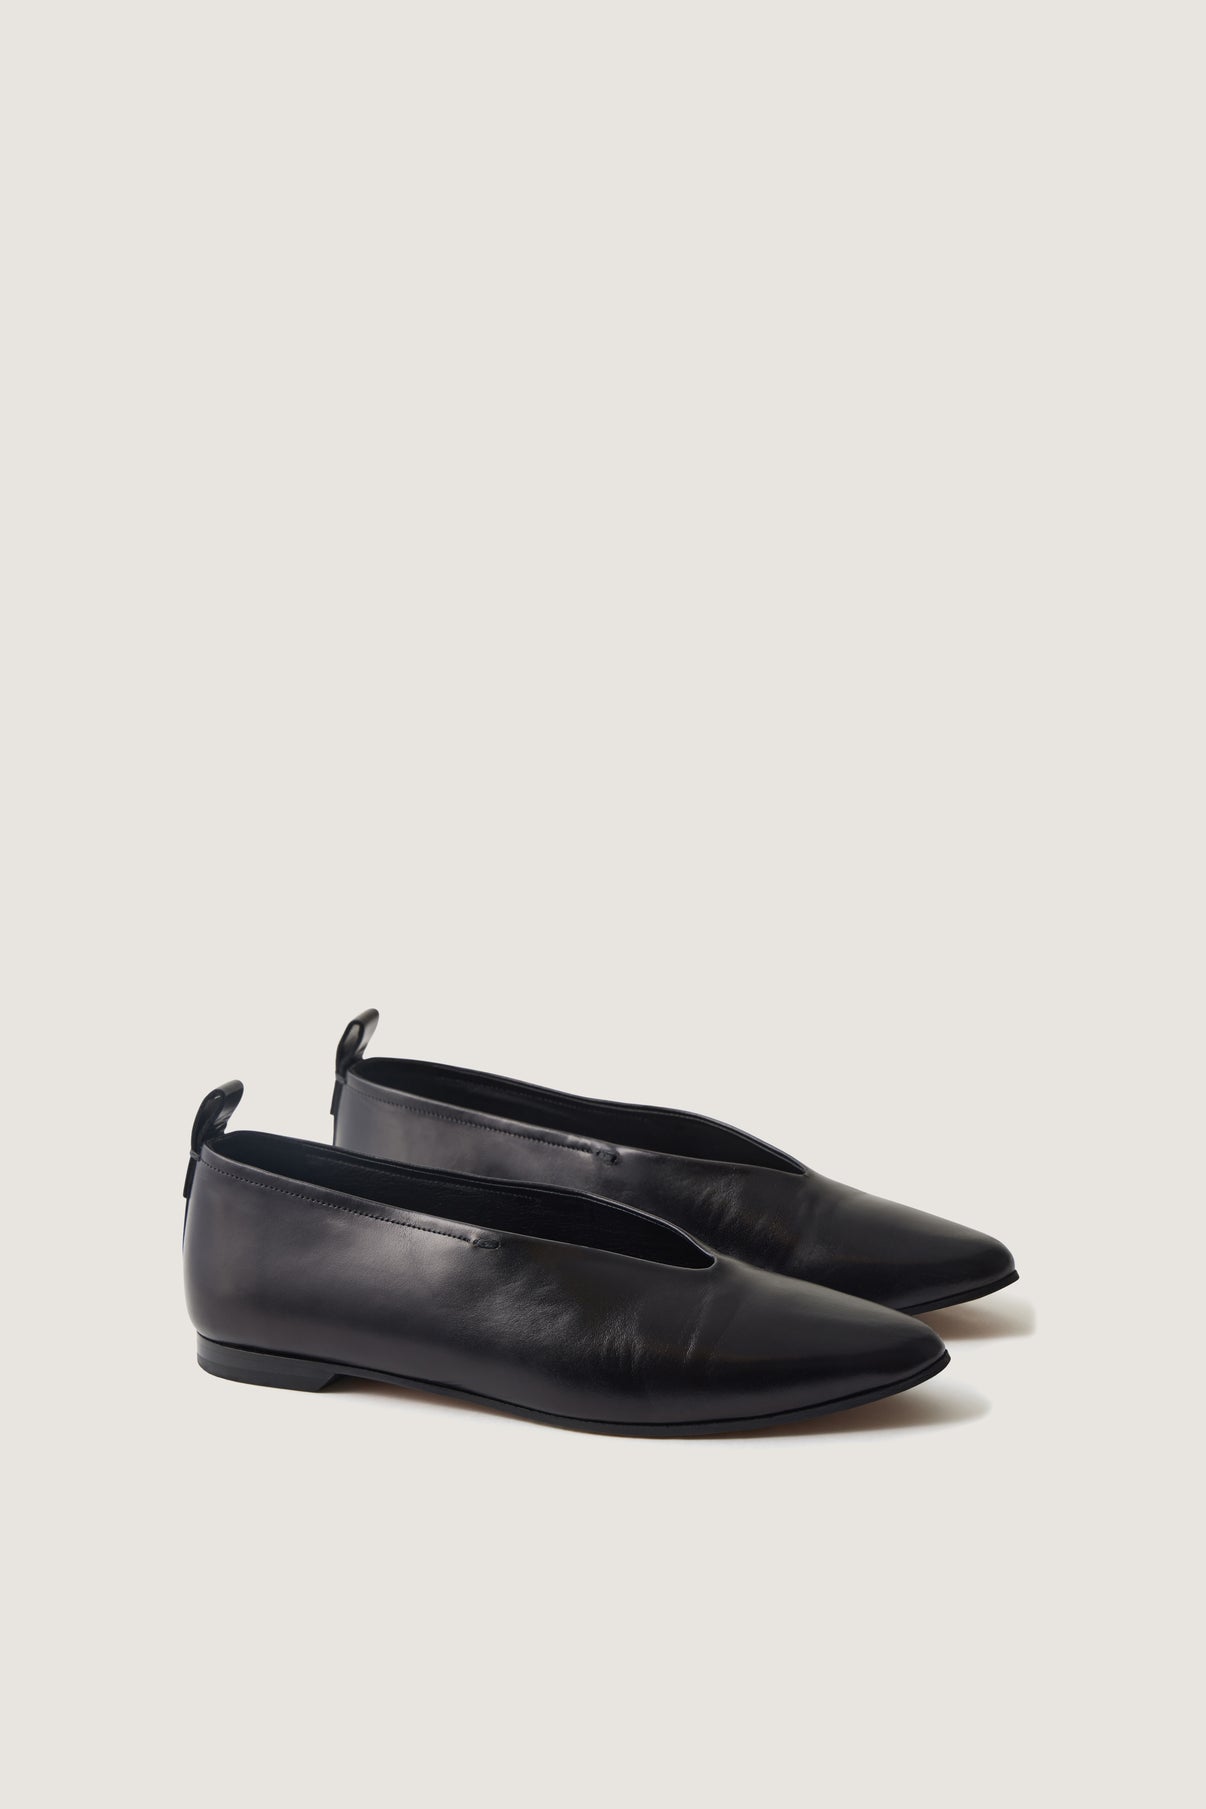 AVA LOAFERS vue 4